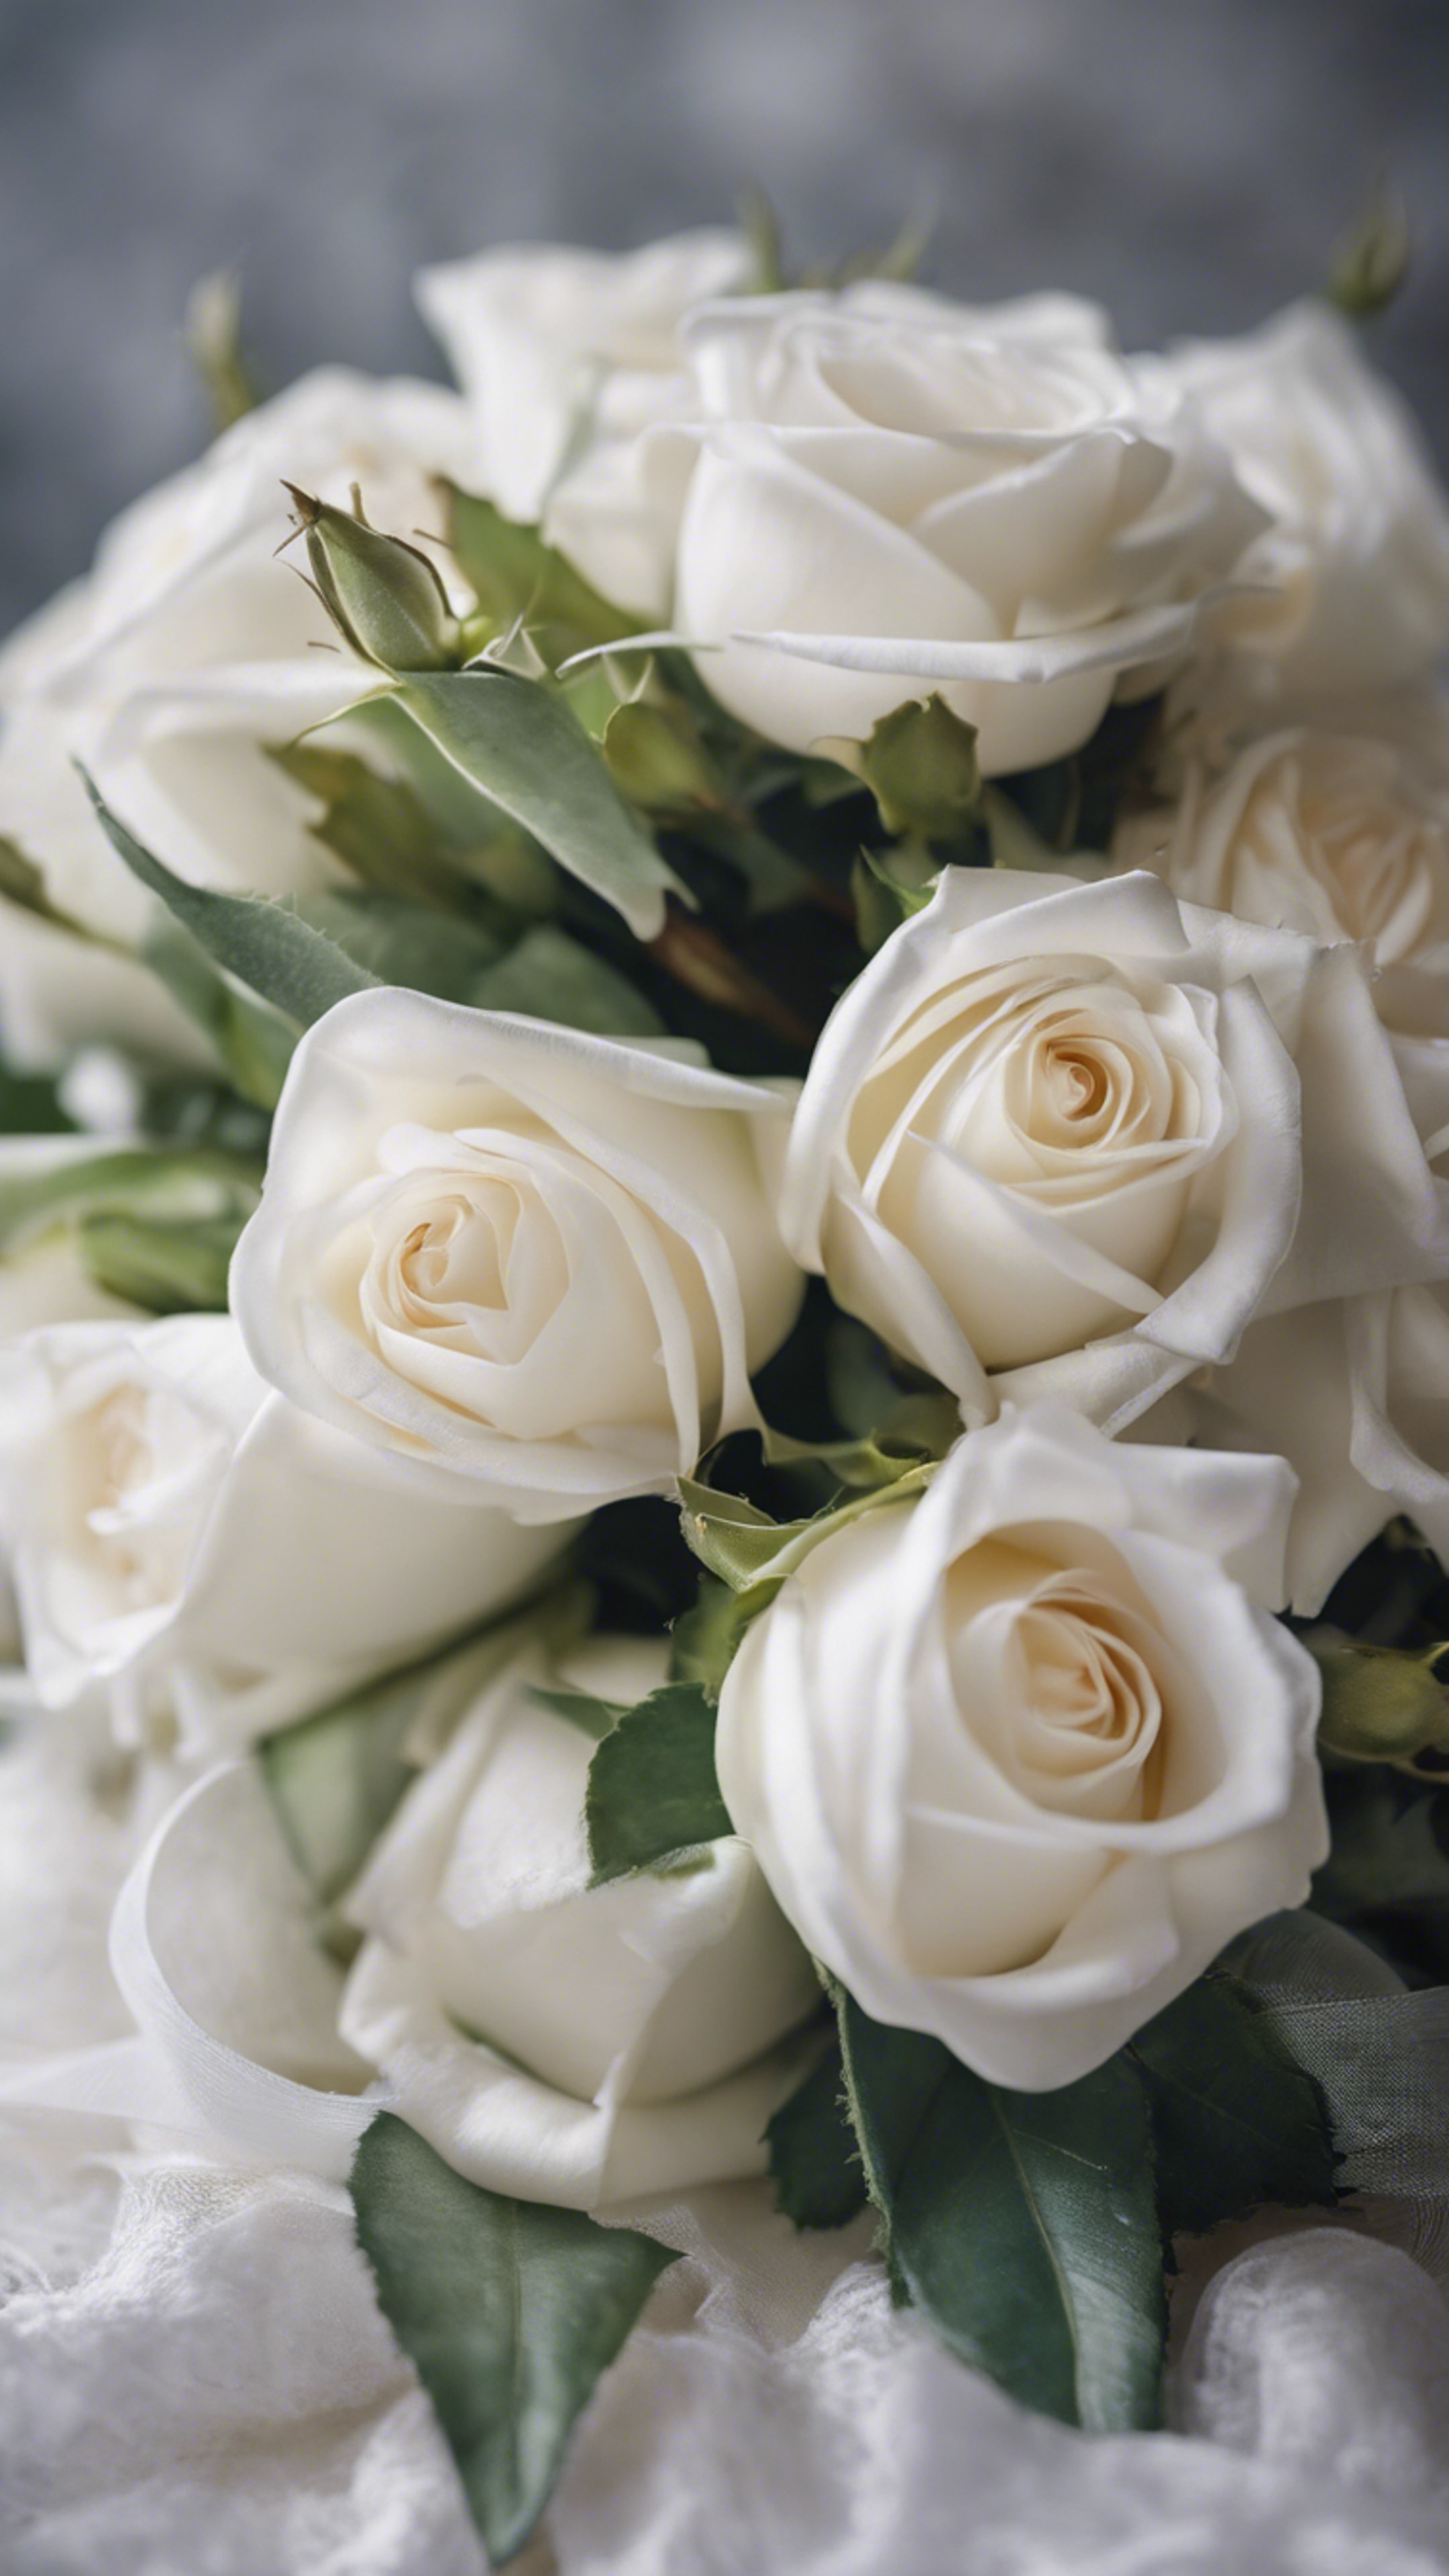 A bouquet of white roses wrapped in sheer white satin ribbon. Tapéta[5223d8c249ea42cfaf4b]